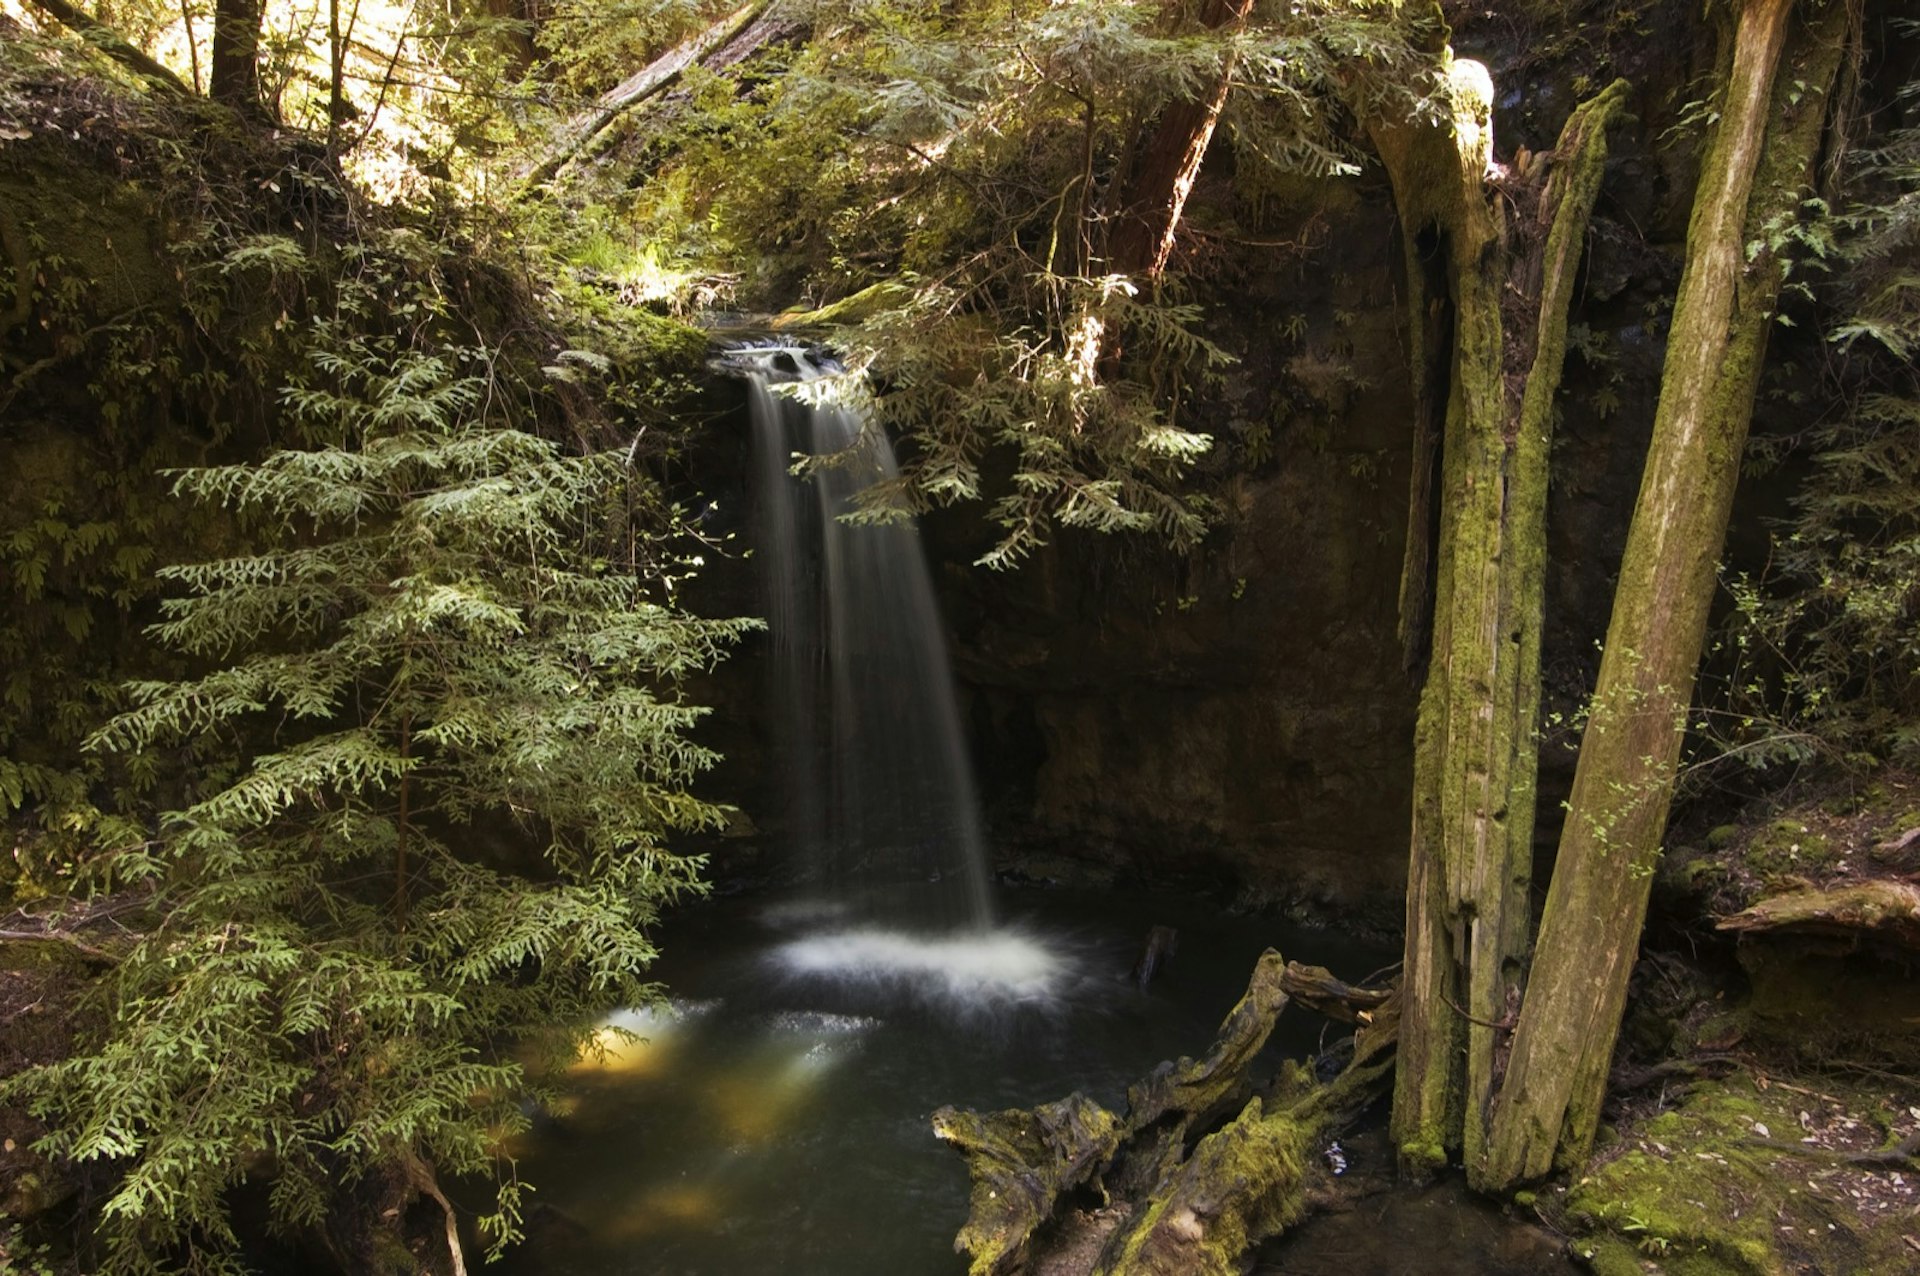 A waterfall cascades into a small pond surrounded by redwood trees another great way to experience California's redwoods